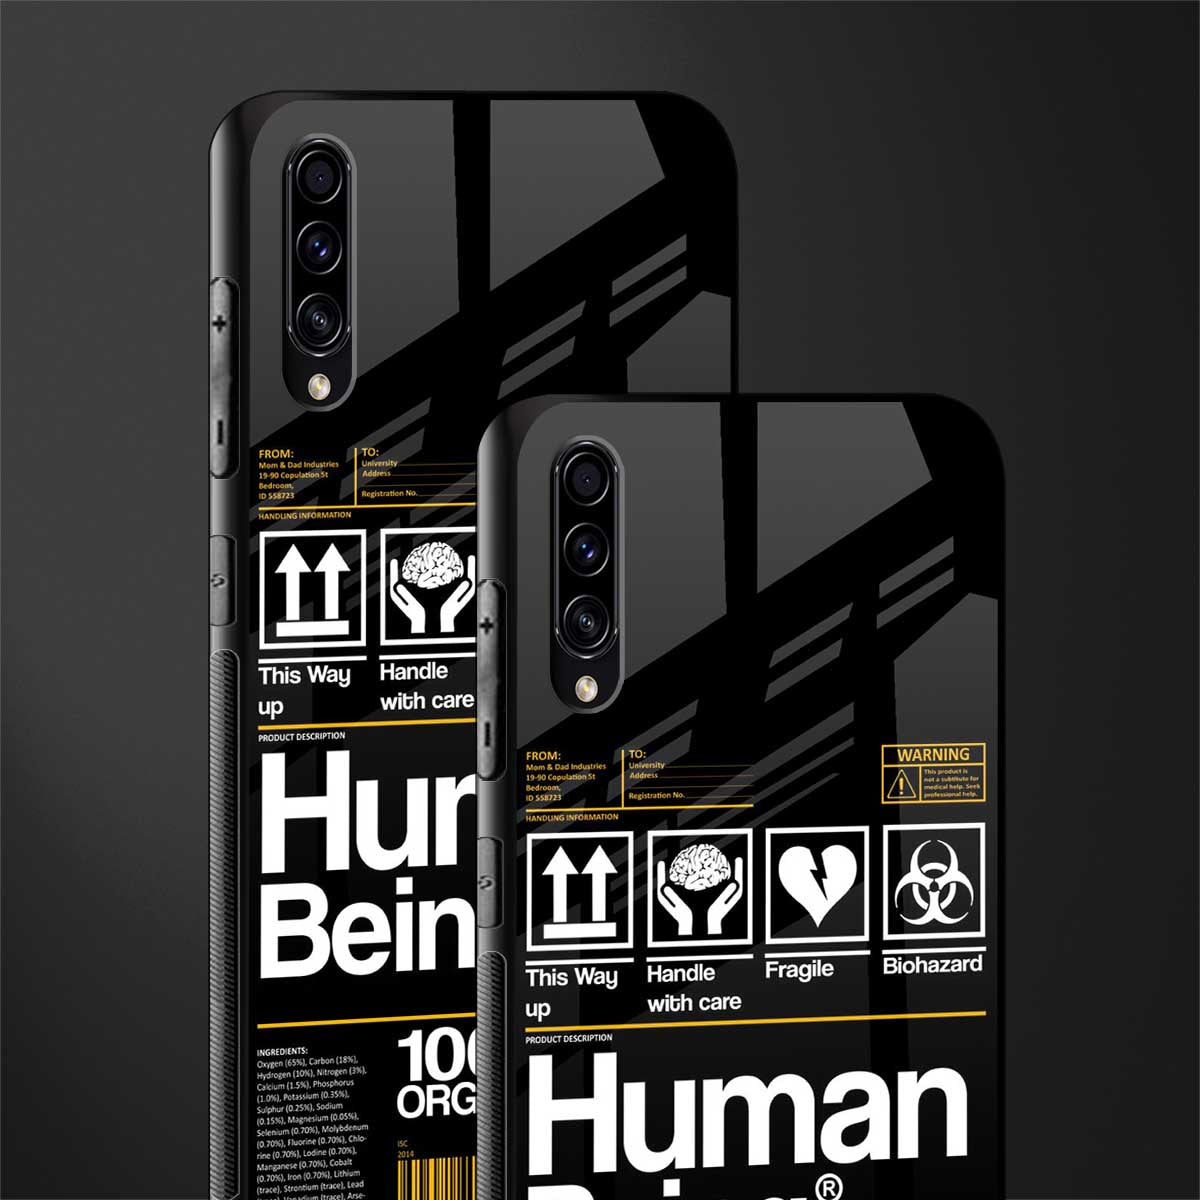 human being label phone cover for samsung galaxy a70